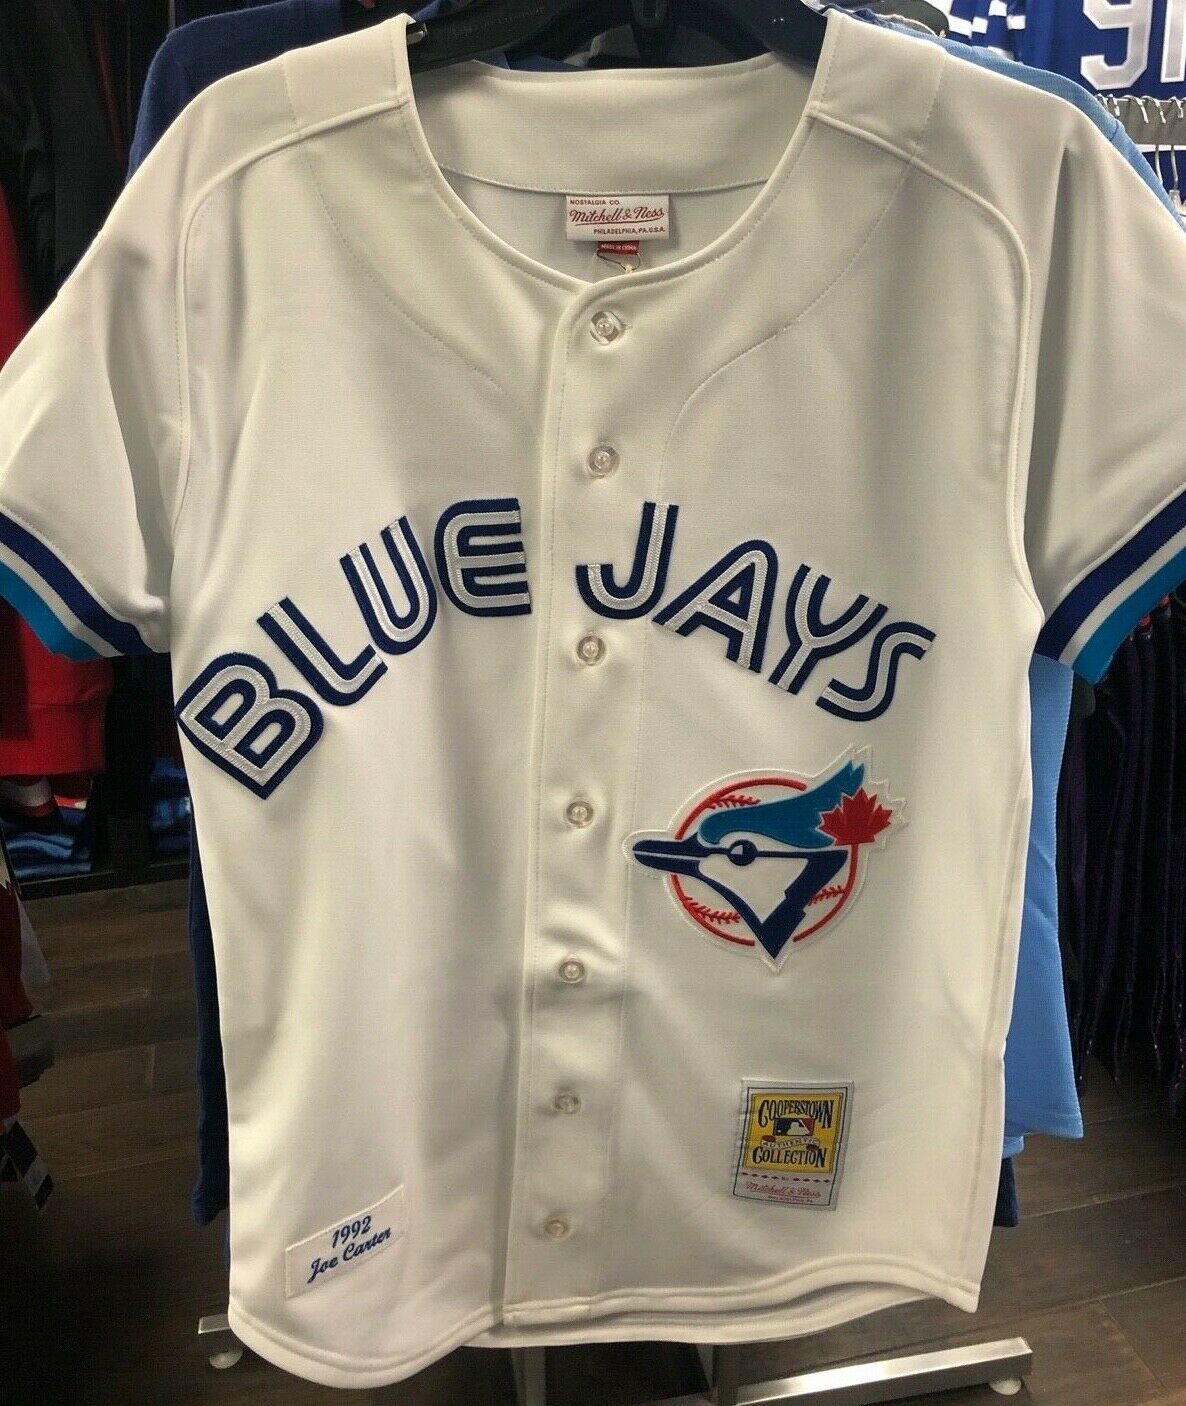 Mitchell & Ness Joe Carter Toronto Blue Jays 1993 Authentic Cooperstown Collection Mesh Batting Practice Jersey - Royal